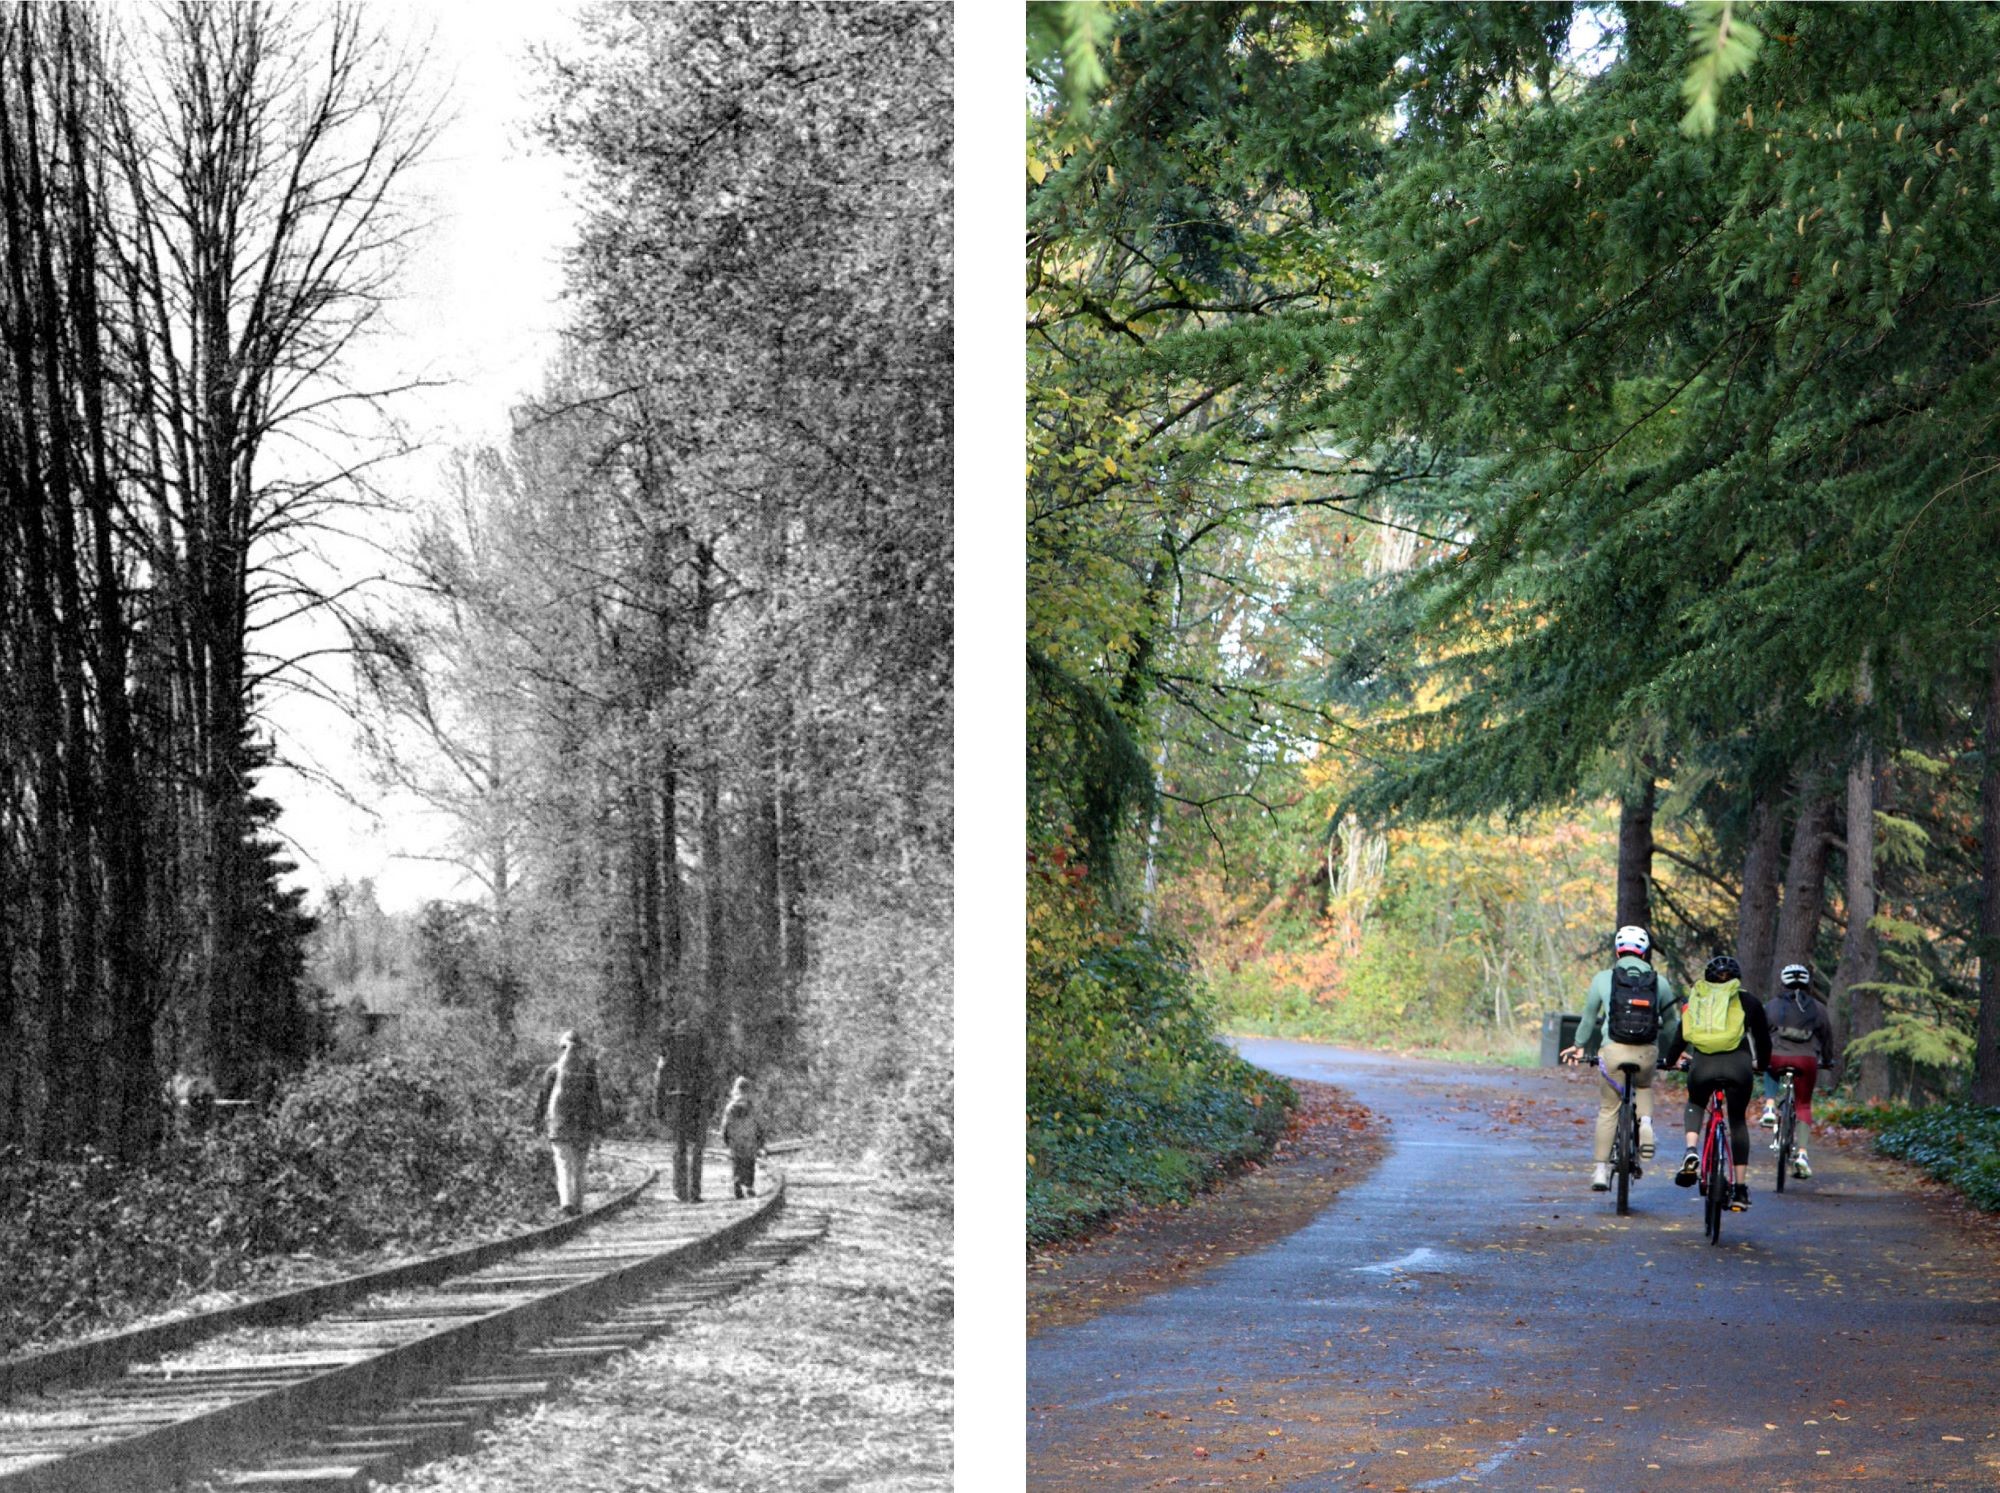 Burke Gilman Trail past and present. Left: 1970. Right: 2019 